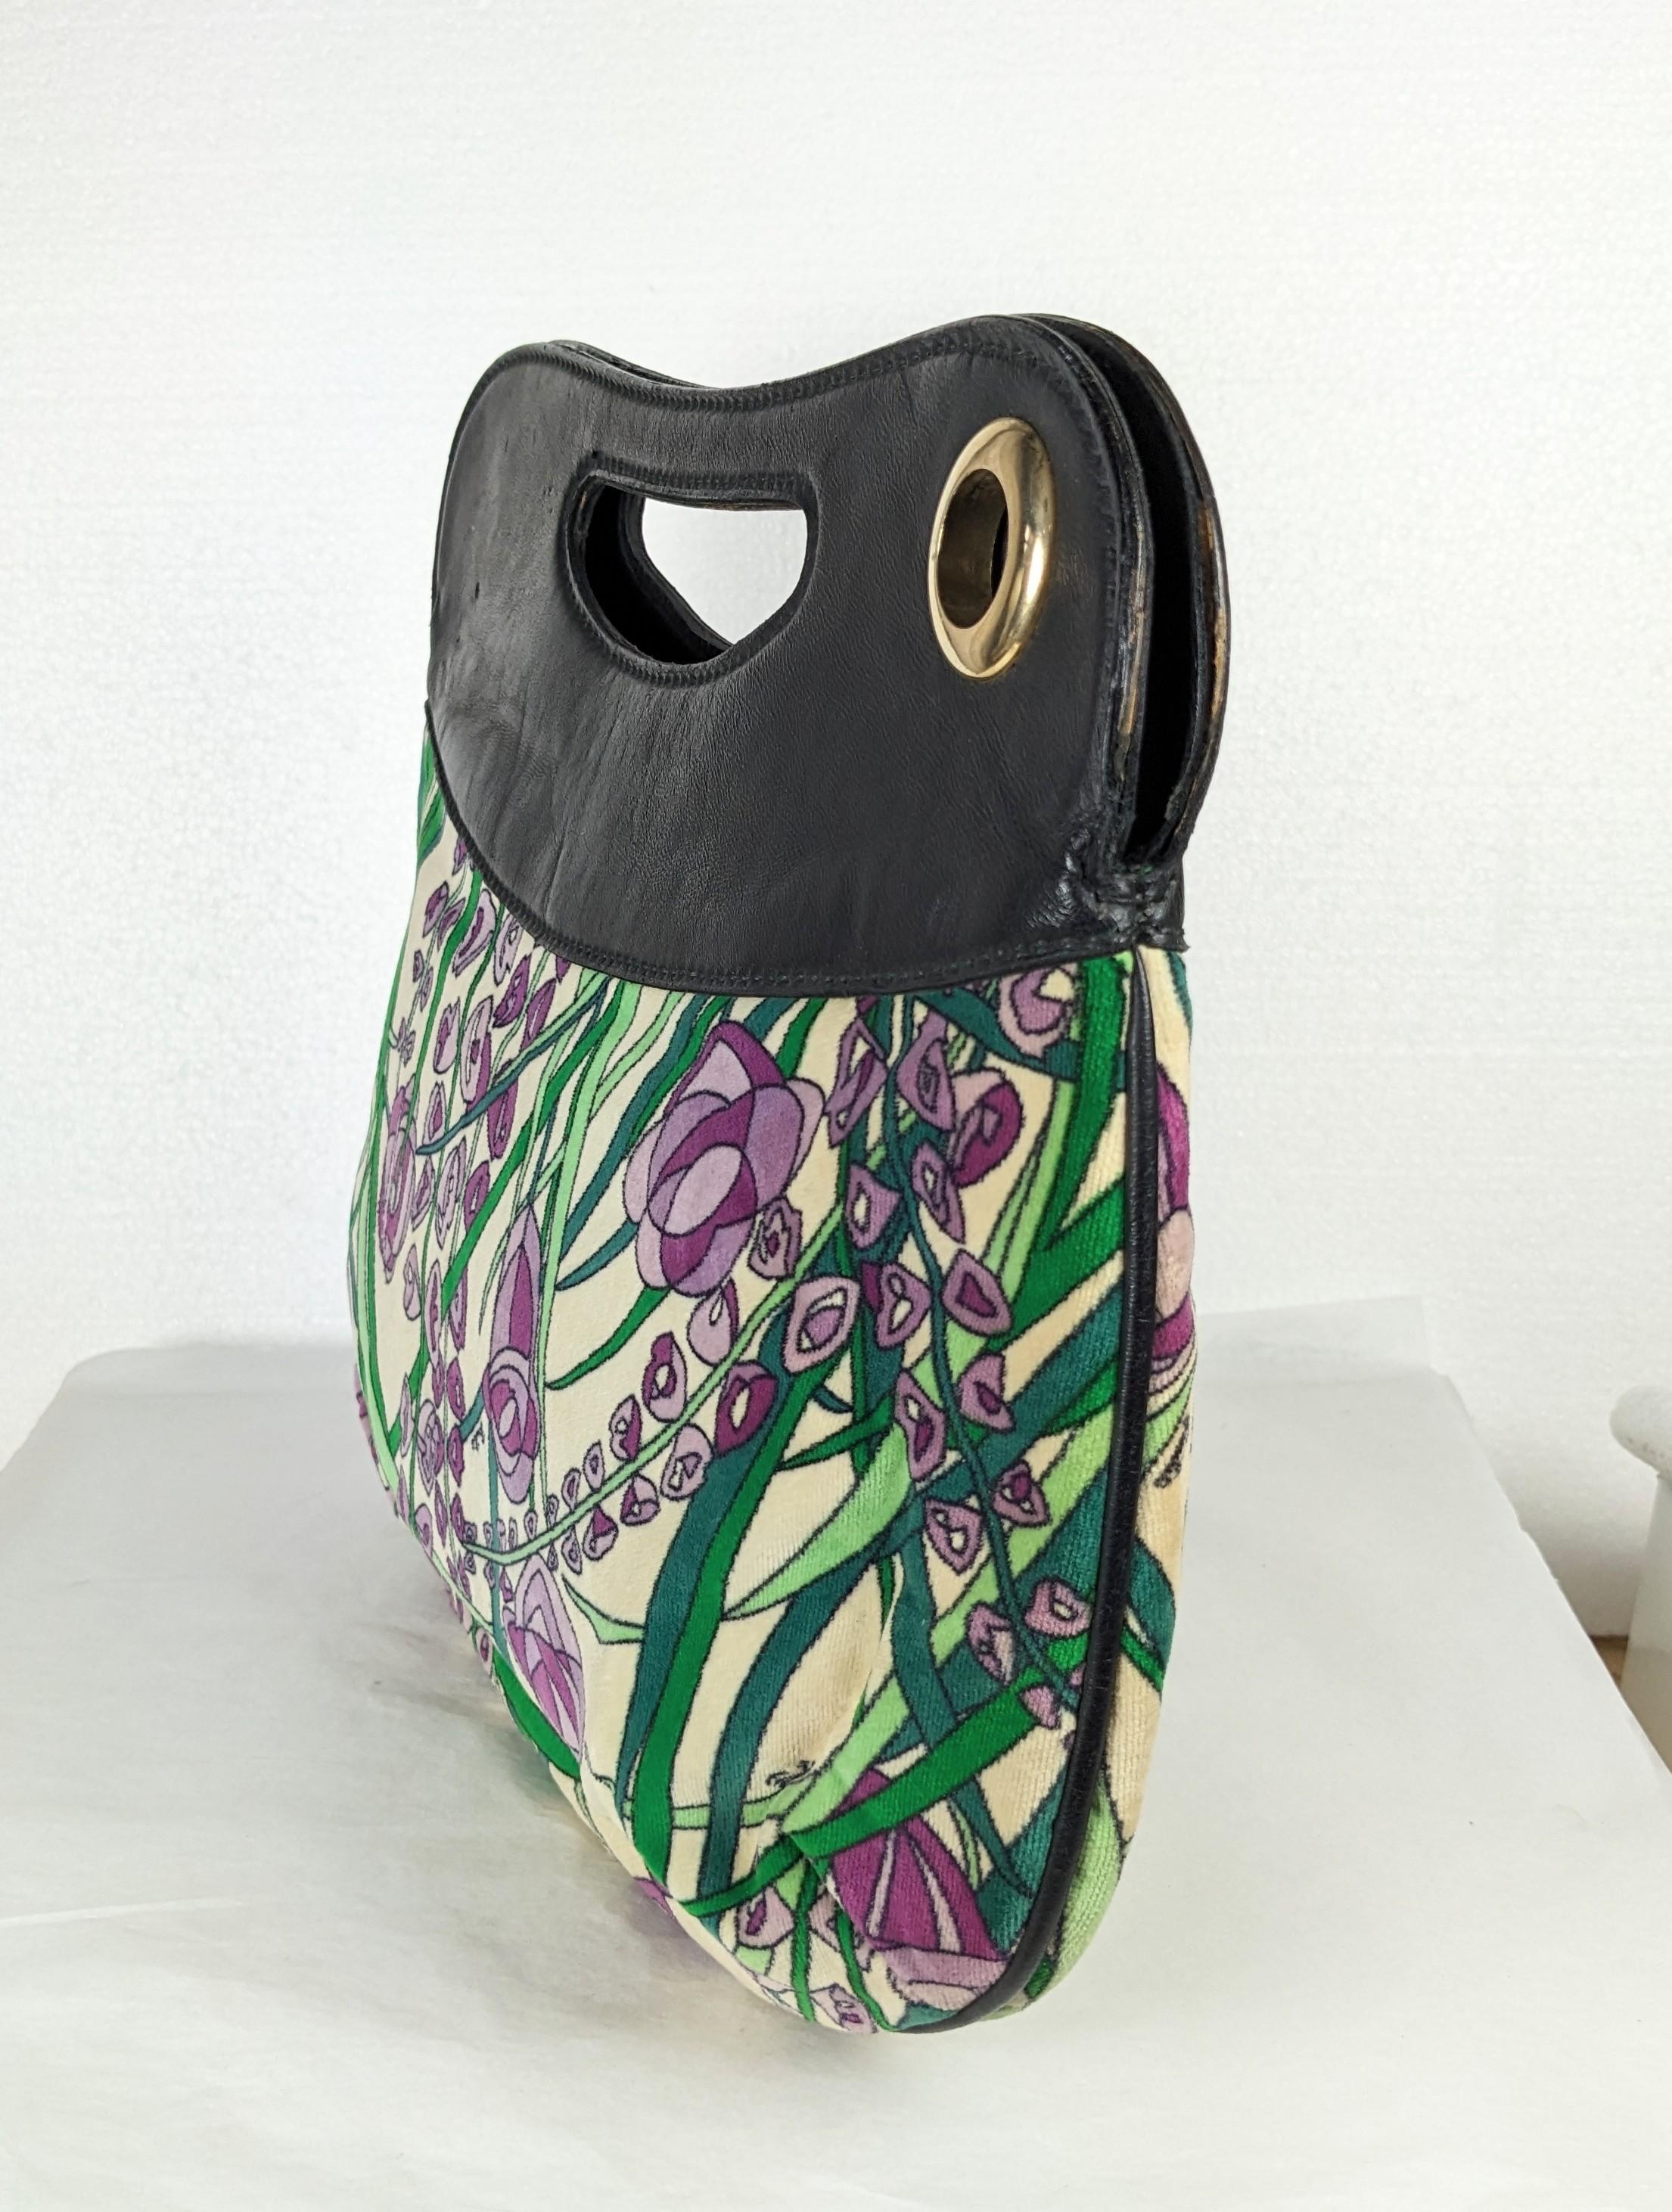 Emilio Pucci Transformable Top Handle Clutch  im Zustand „Gut“ im Angebot in New York, NY